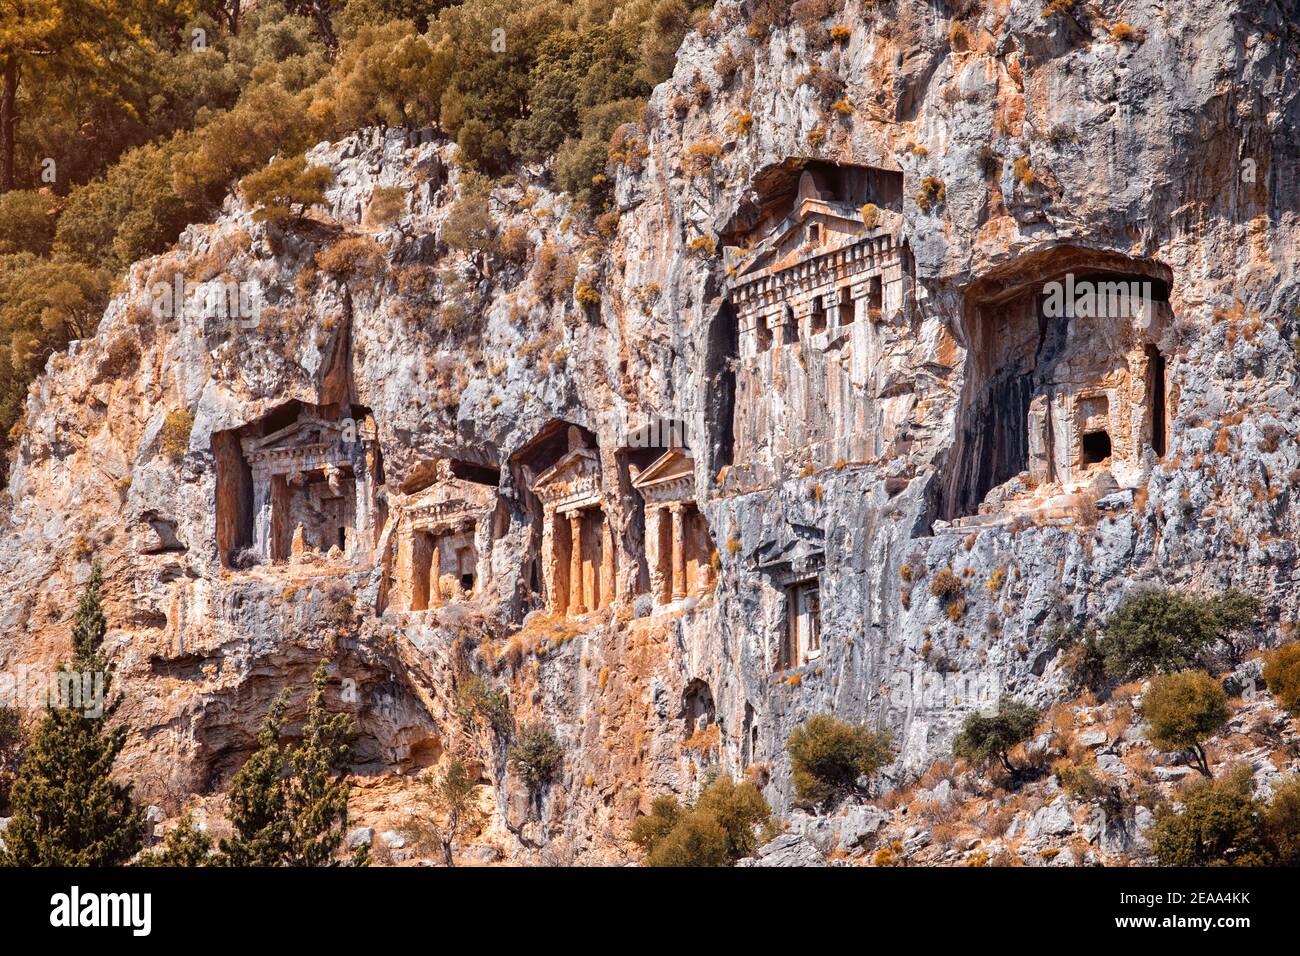 Famous historical and cultural monument - tombs of kings of ancient town Kaunos in modern city of Dalyan, Turkey. Architecture carved in rocks and cli Stock Photo